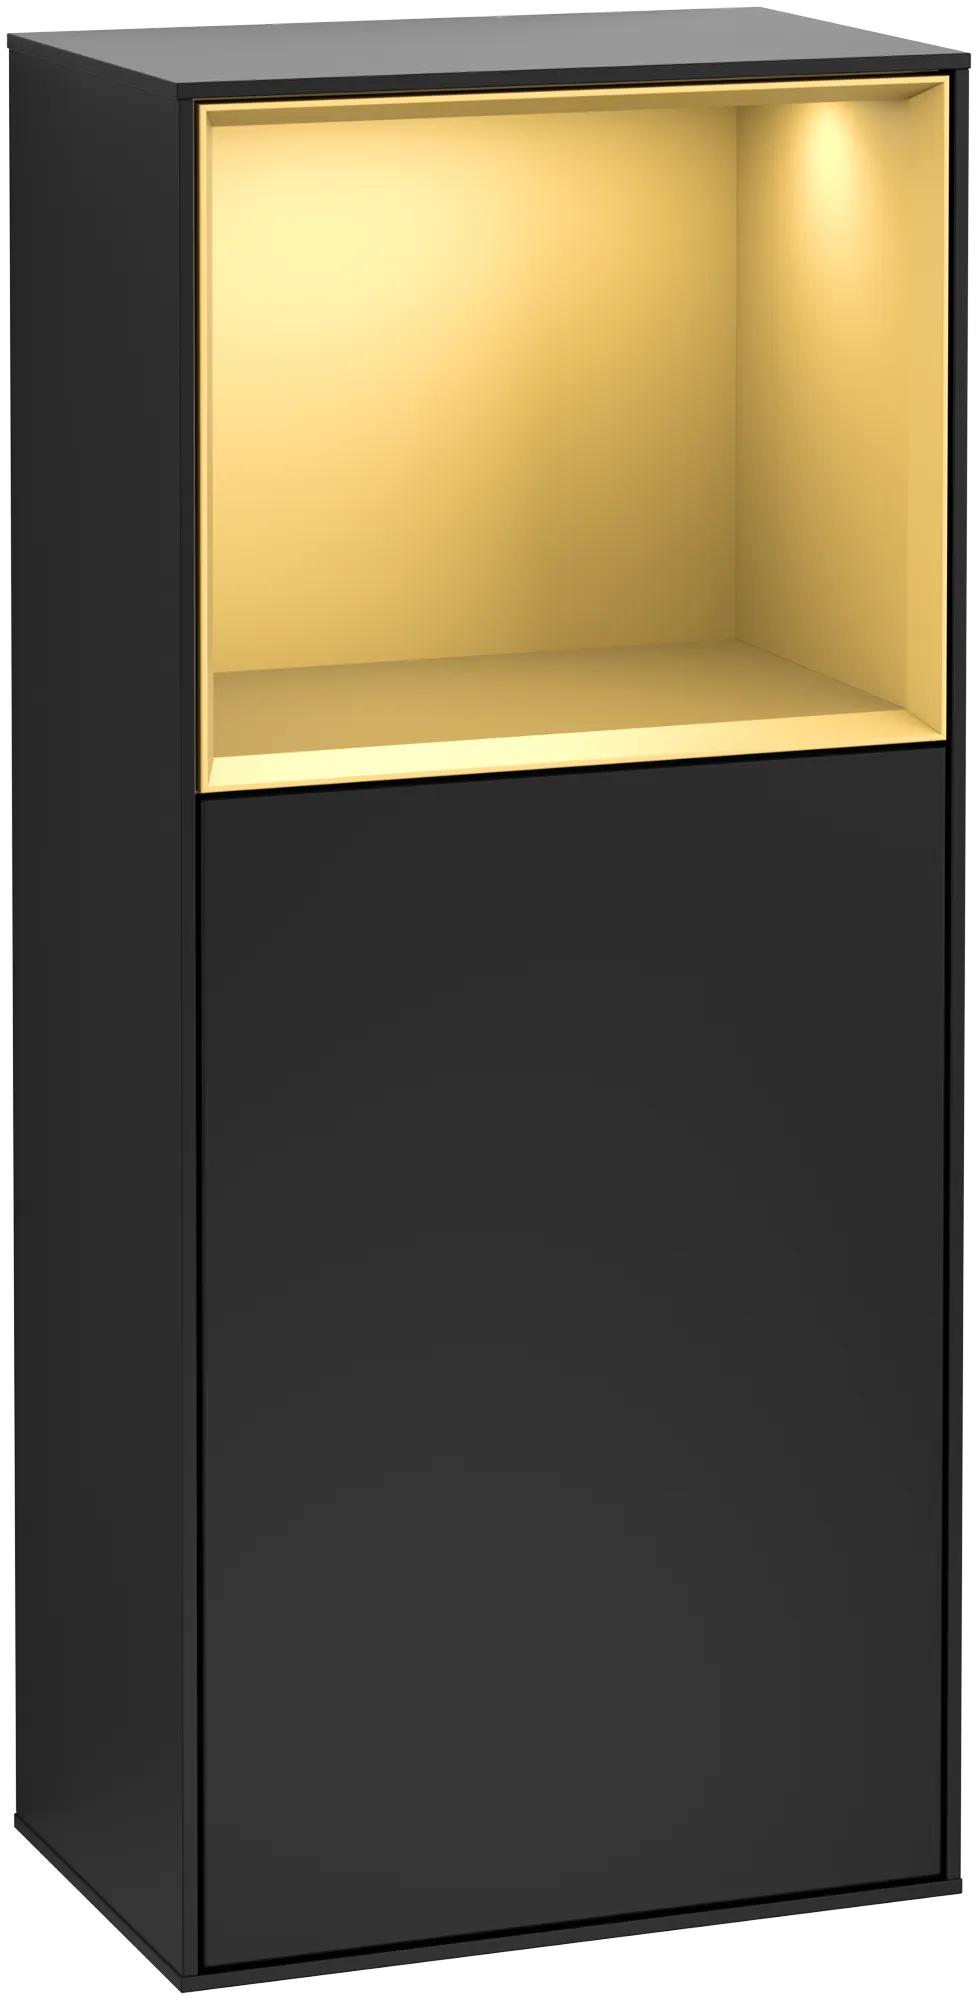 Picture of VILLEROY BOCH Finion Side cabinet, with lighting, 1 door, 418 x 936 x 270 mm, Black Matt Lacquer / Gold Matt Lacquer #G510HFPD